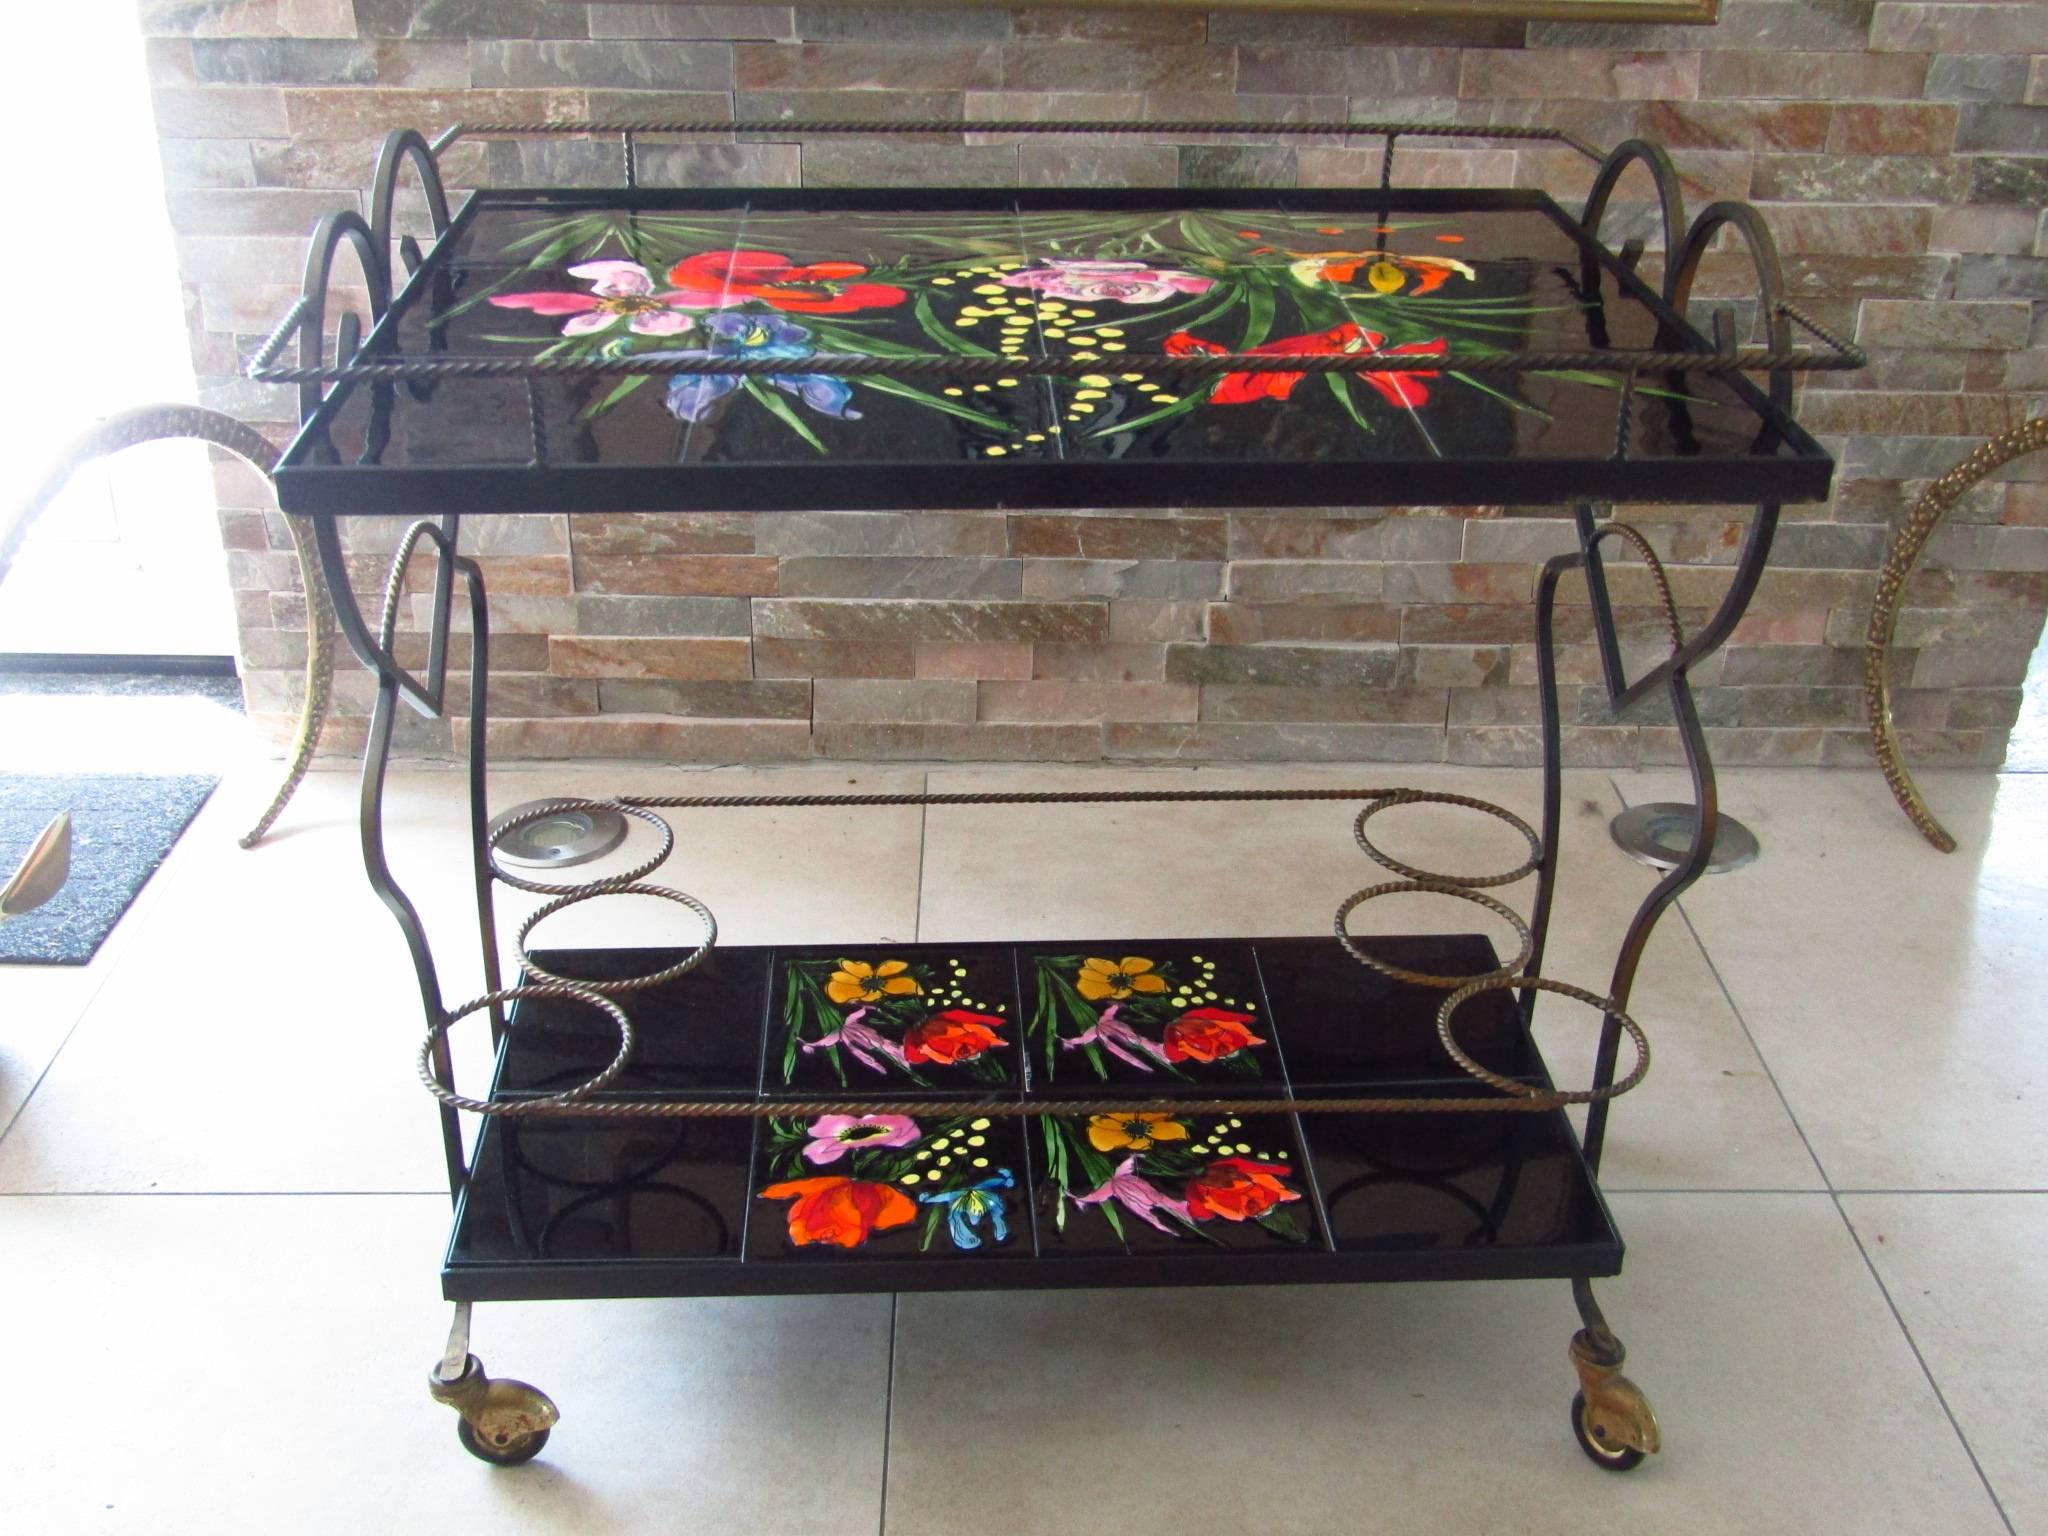 Midcentury Bar Cart Tiles and Wrought Iron, Vallauris France, 1950s For Sale 1